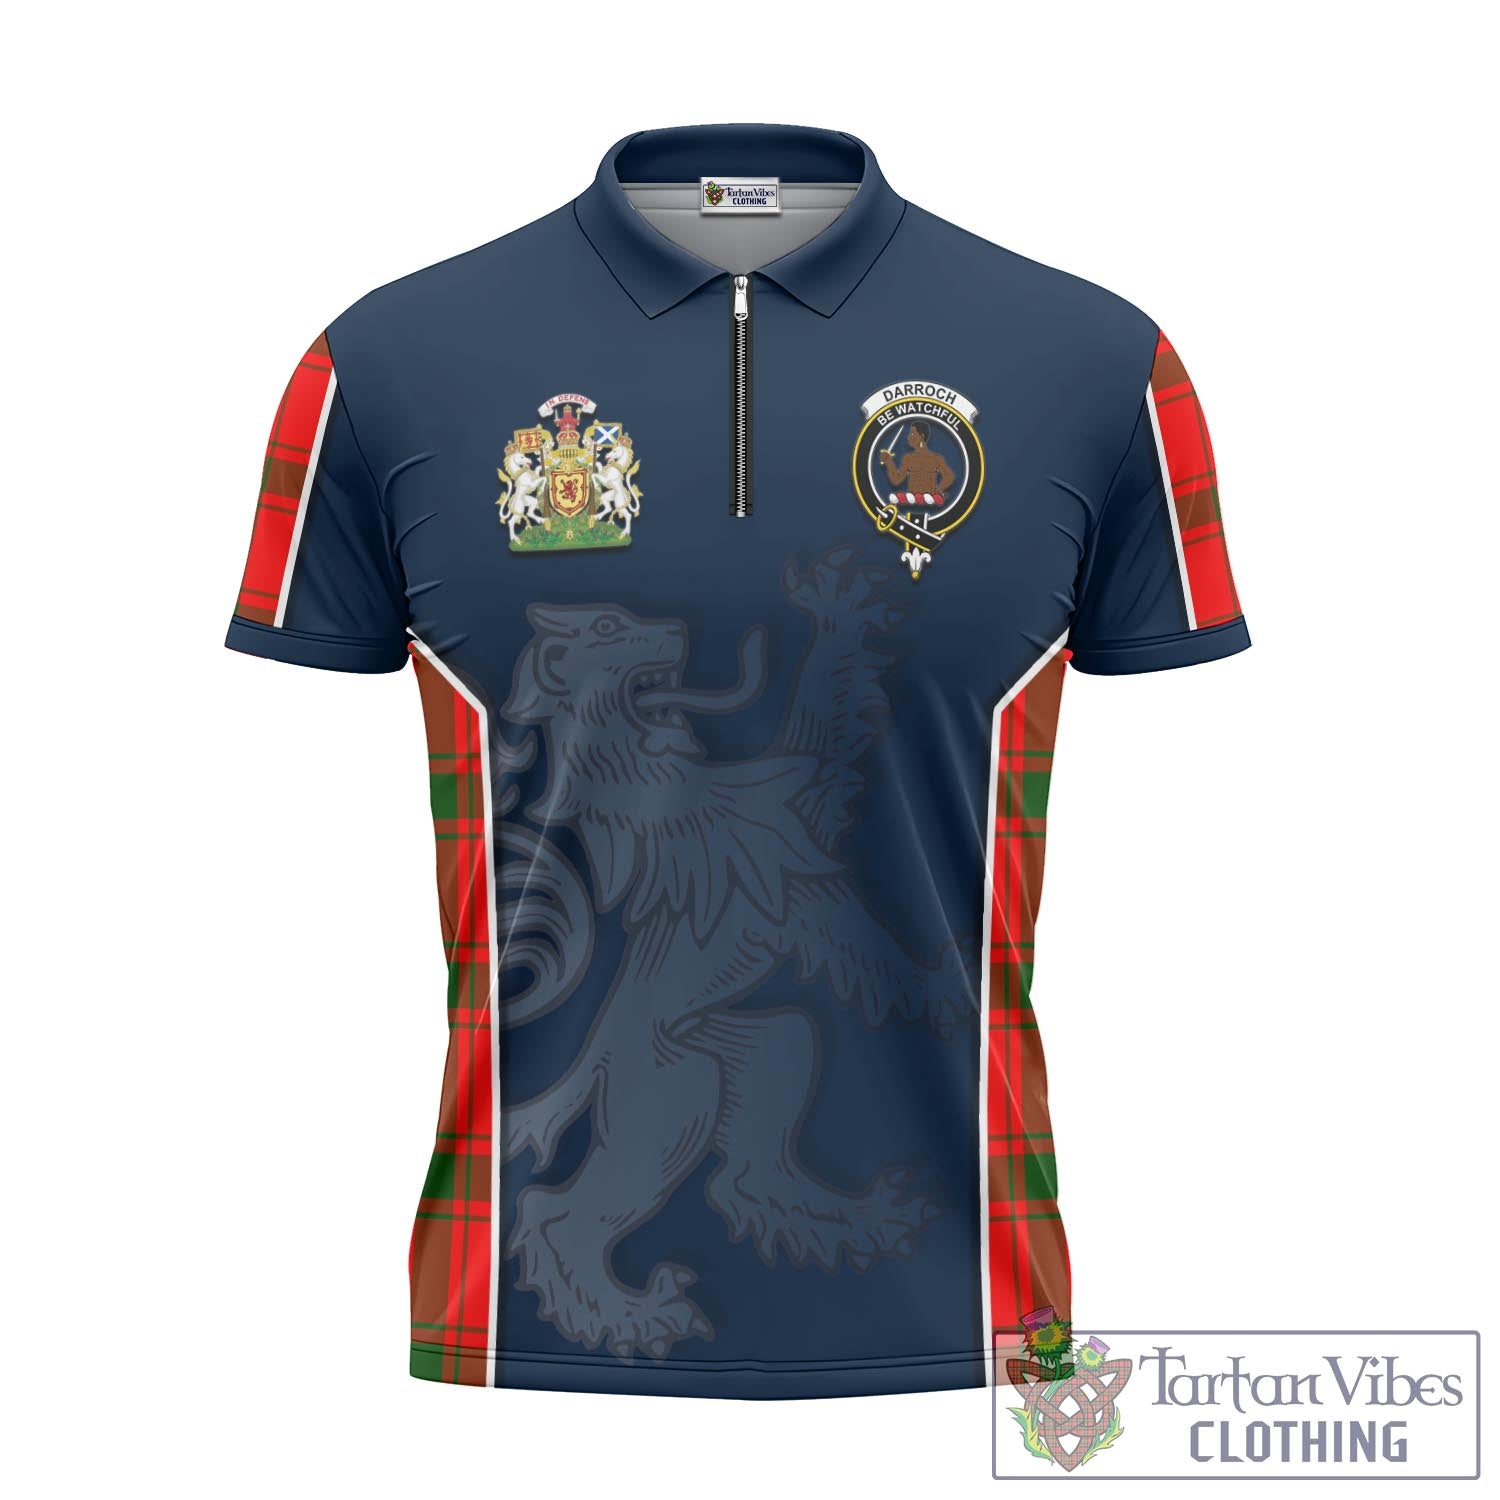 Tartan Vibes Clothing Darroch Tartan Zipper Polo Shirt with Family Crest and Lion Rampant Vibes Sport Style